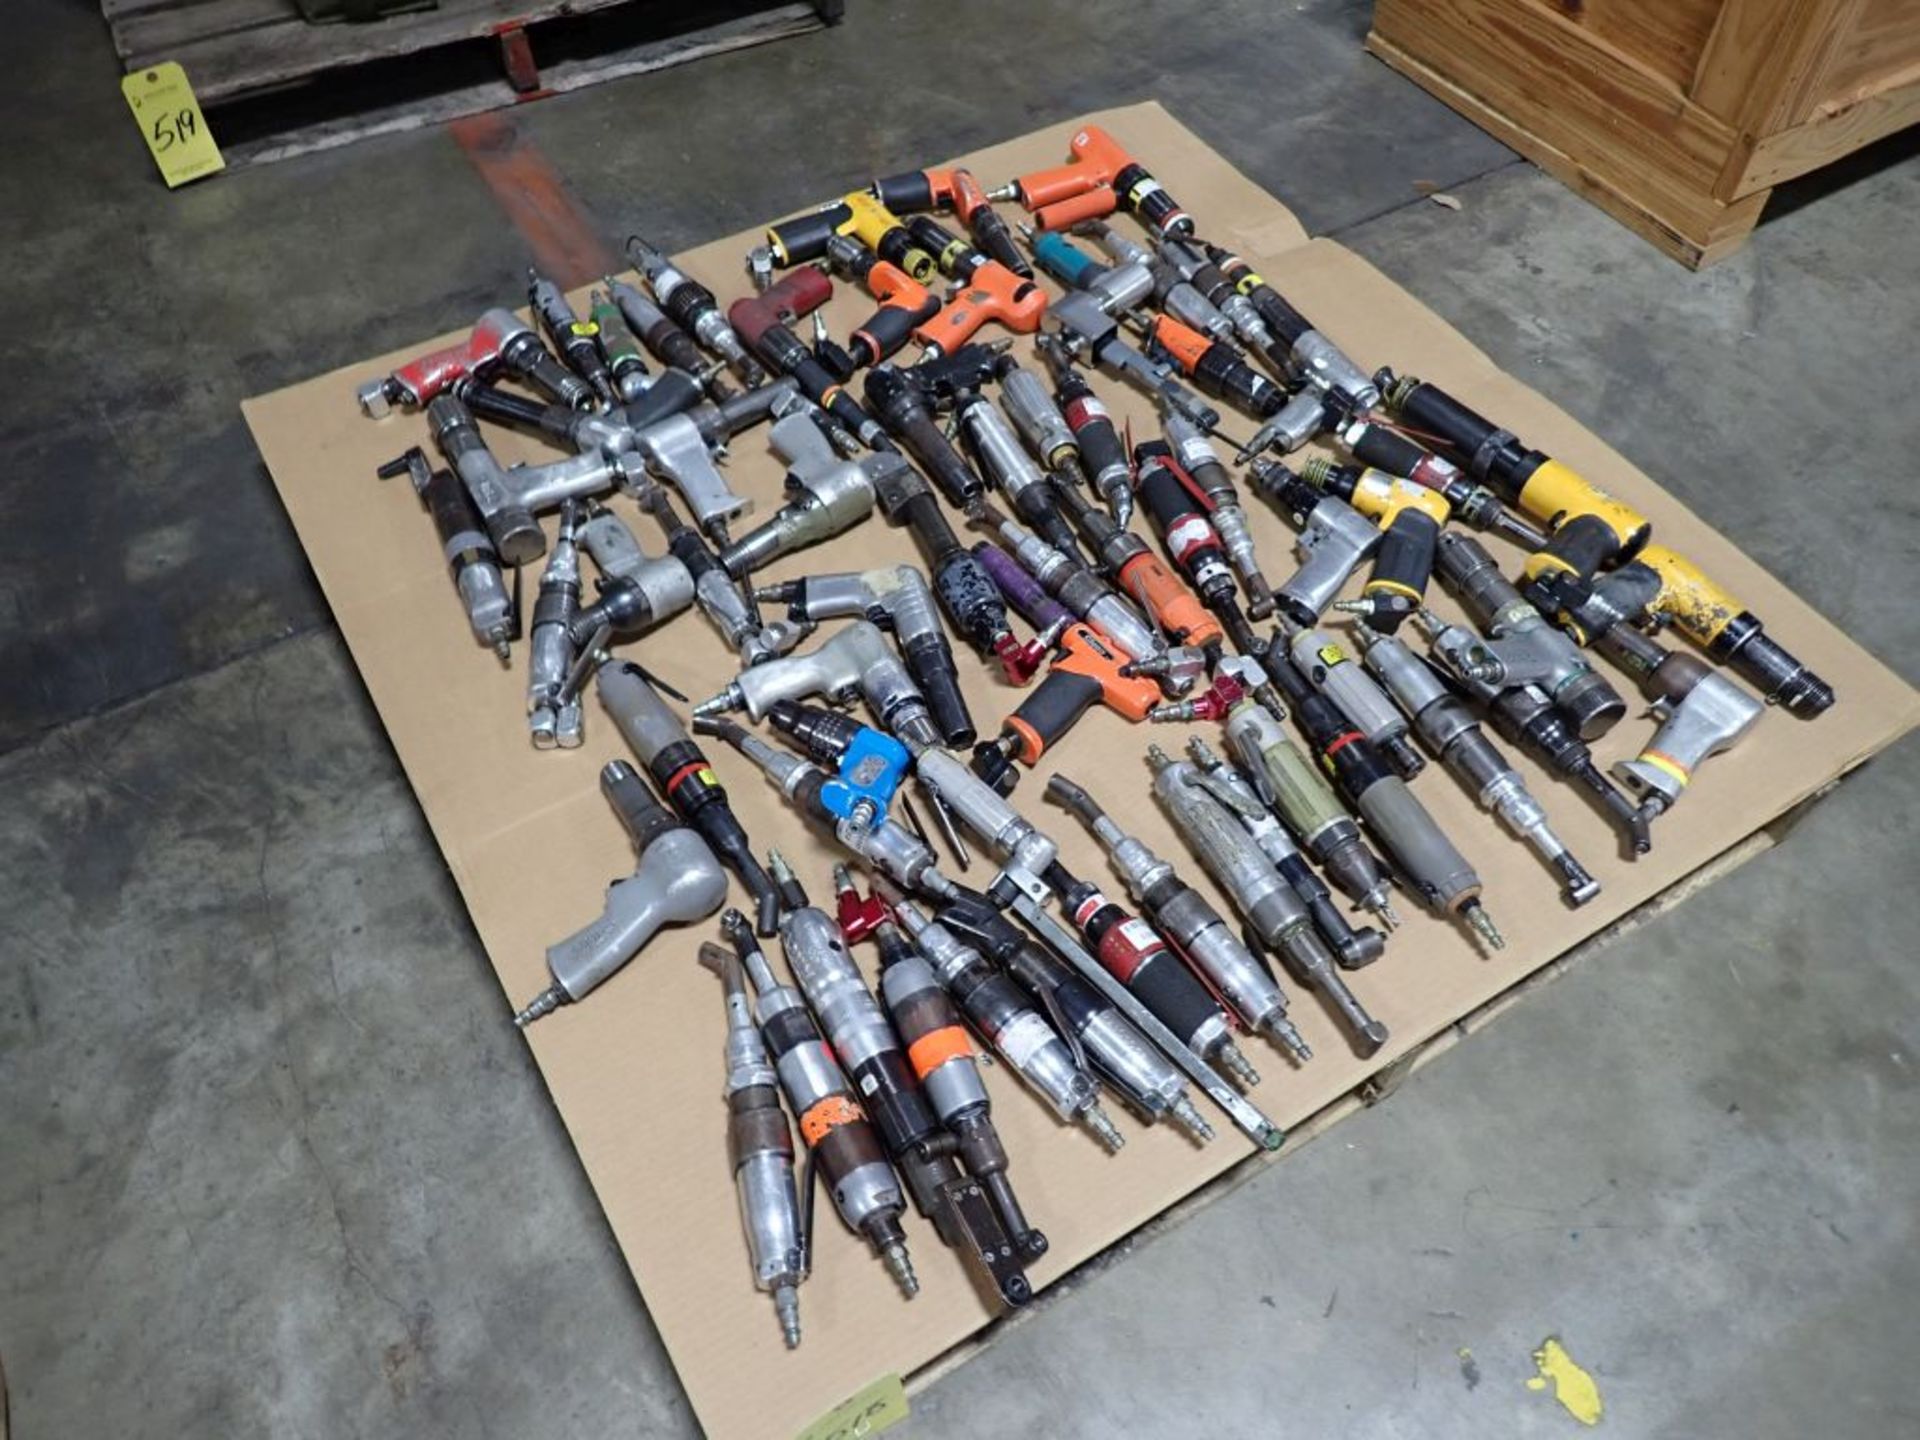 Lot of Pneumatic Tools | Tag: 241518 | Limited Forklift Assistance Available - $10.00 Lot Loading